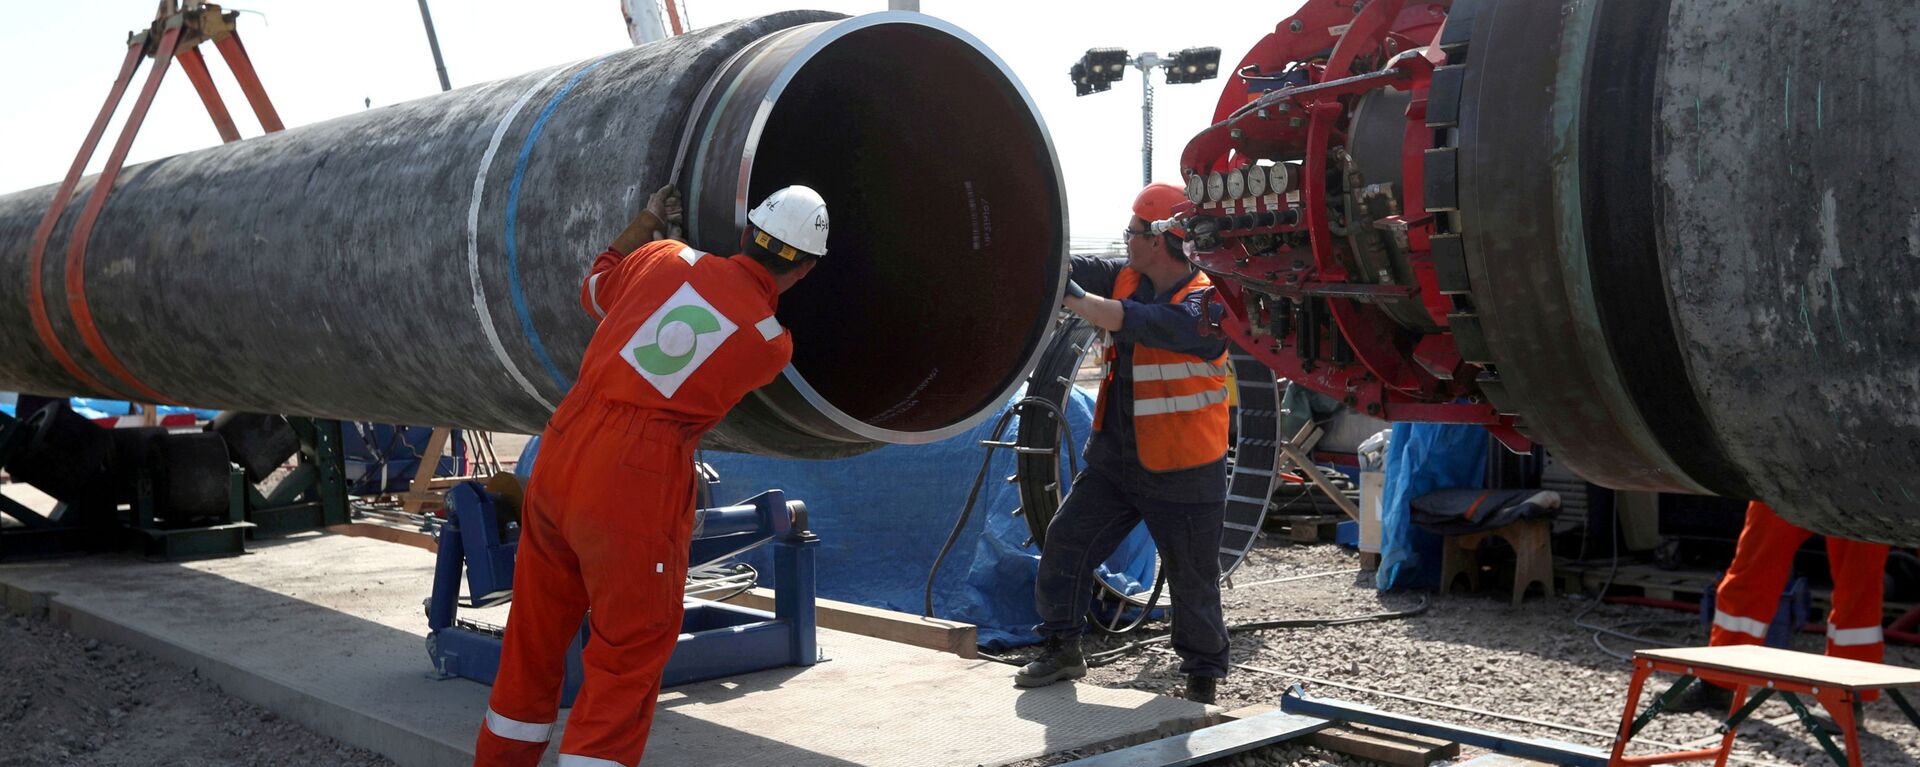 FILE PHOTO: Workers are seen at the construction site of the Nord Stream 2 gas pipeline, near the town of Kingisepp, Leningrad region, Russia, June 5, 2019 - Sputnik International, 1920, 07.12.2021